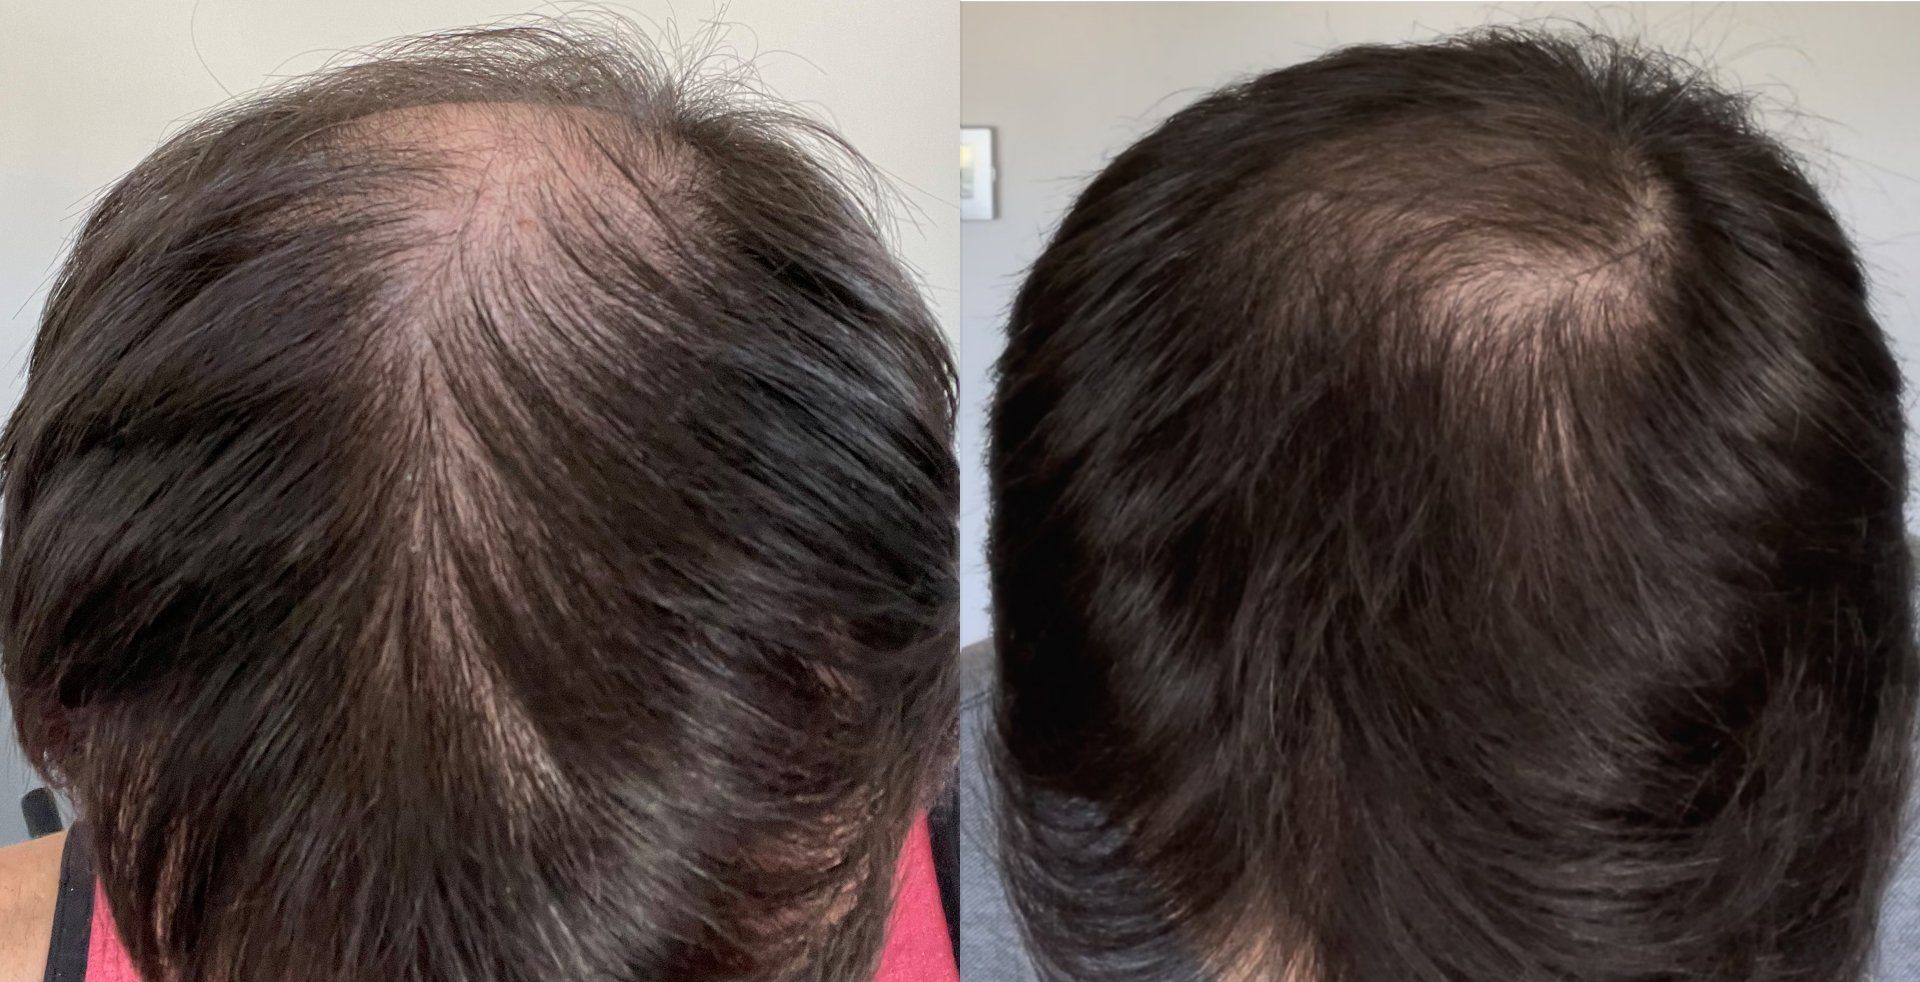 Hair Regrowth Treatment before and after 9 months Ryan